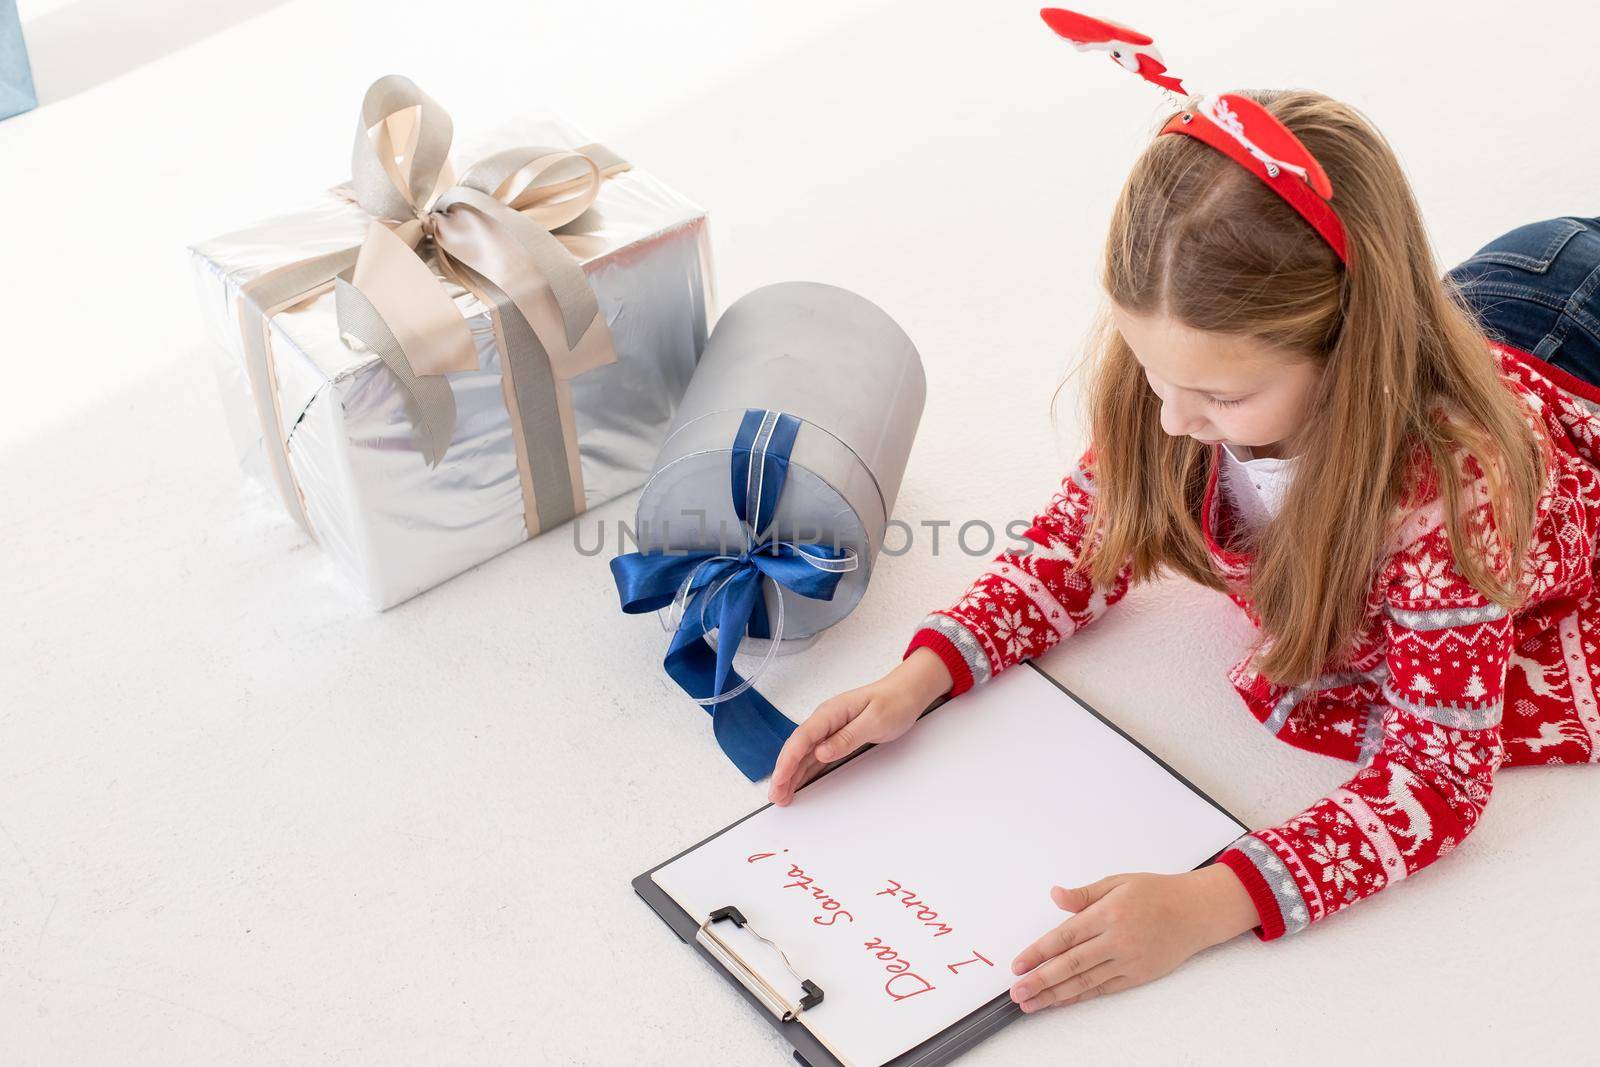 dear santa letter written by a child for Christmas.Concentrated kid is involved in the process of thinking over all her wishes and desires. Pretty Girl hold clipboard and paper near gift box. by YuliaYaspe1979